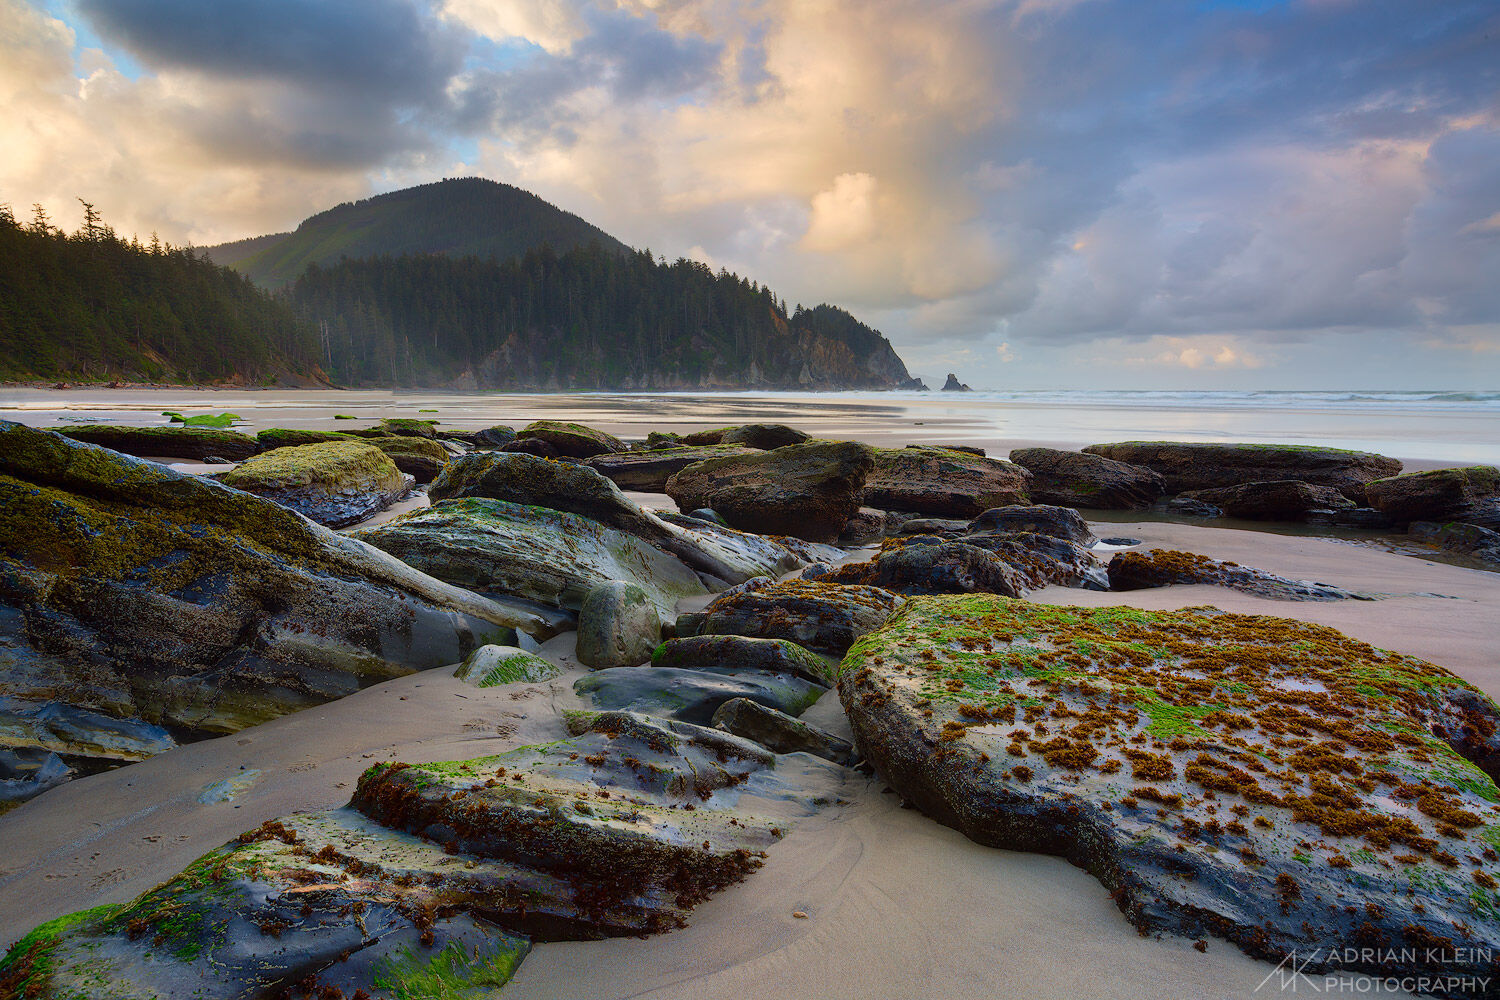 A Sunday morning along the North Oregon Coast at Oswald West State Park. Limited edition of 50.